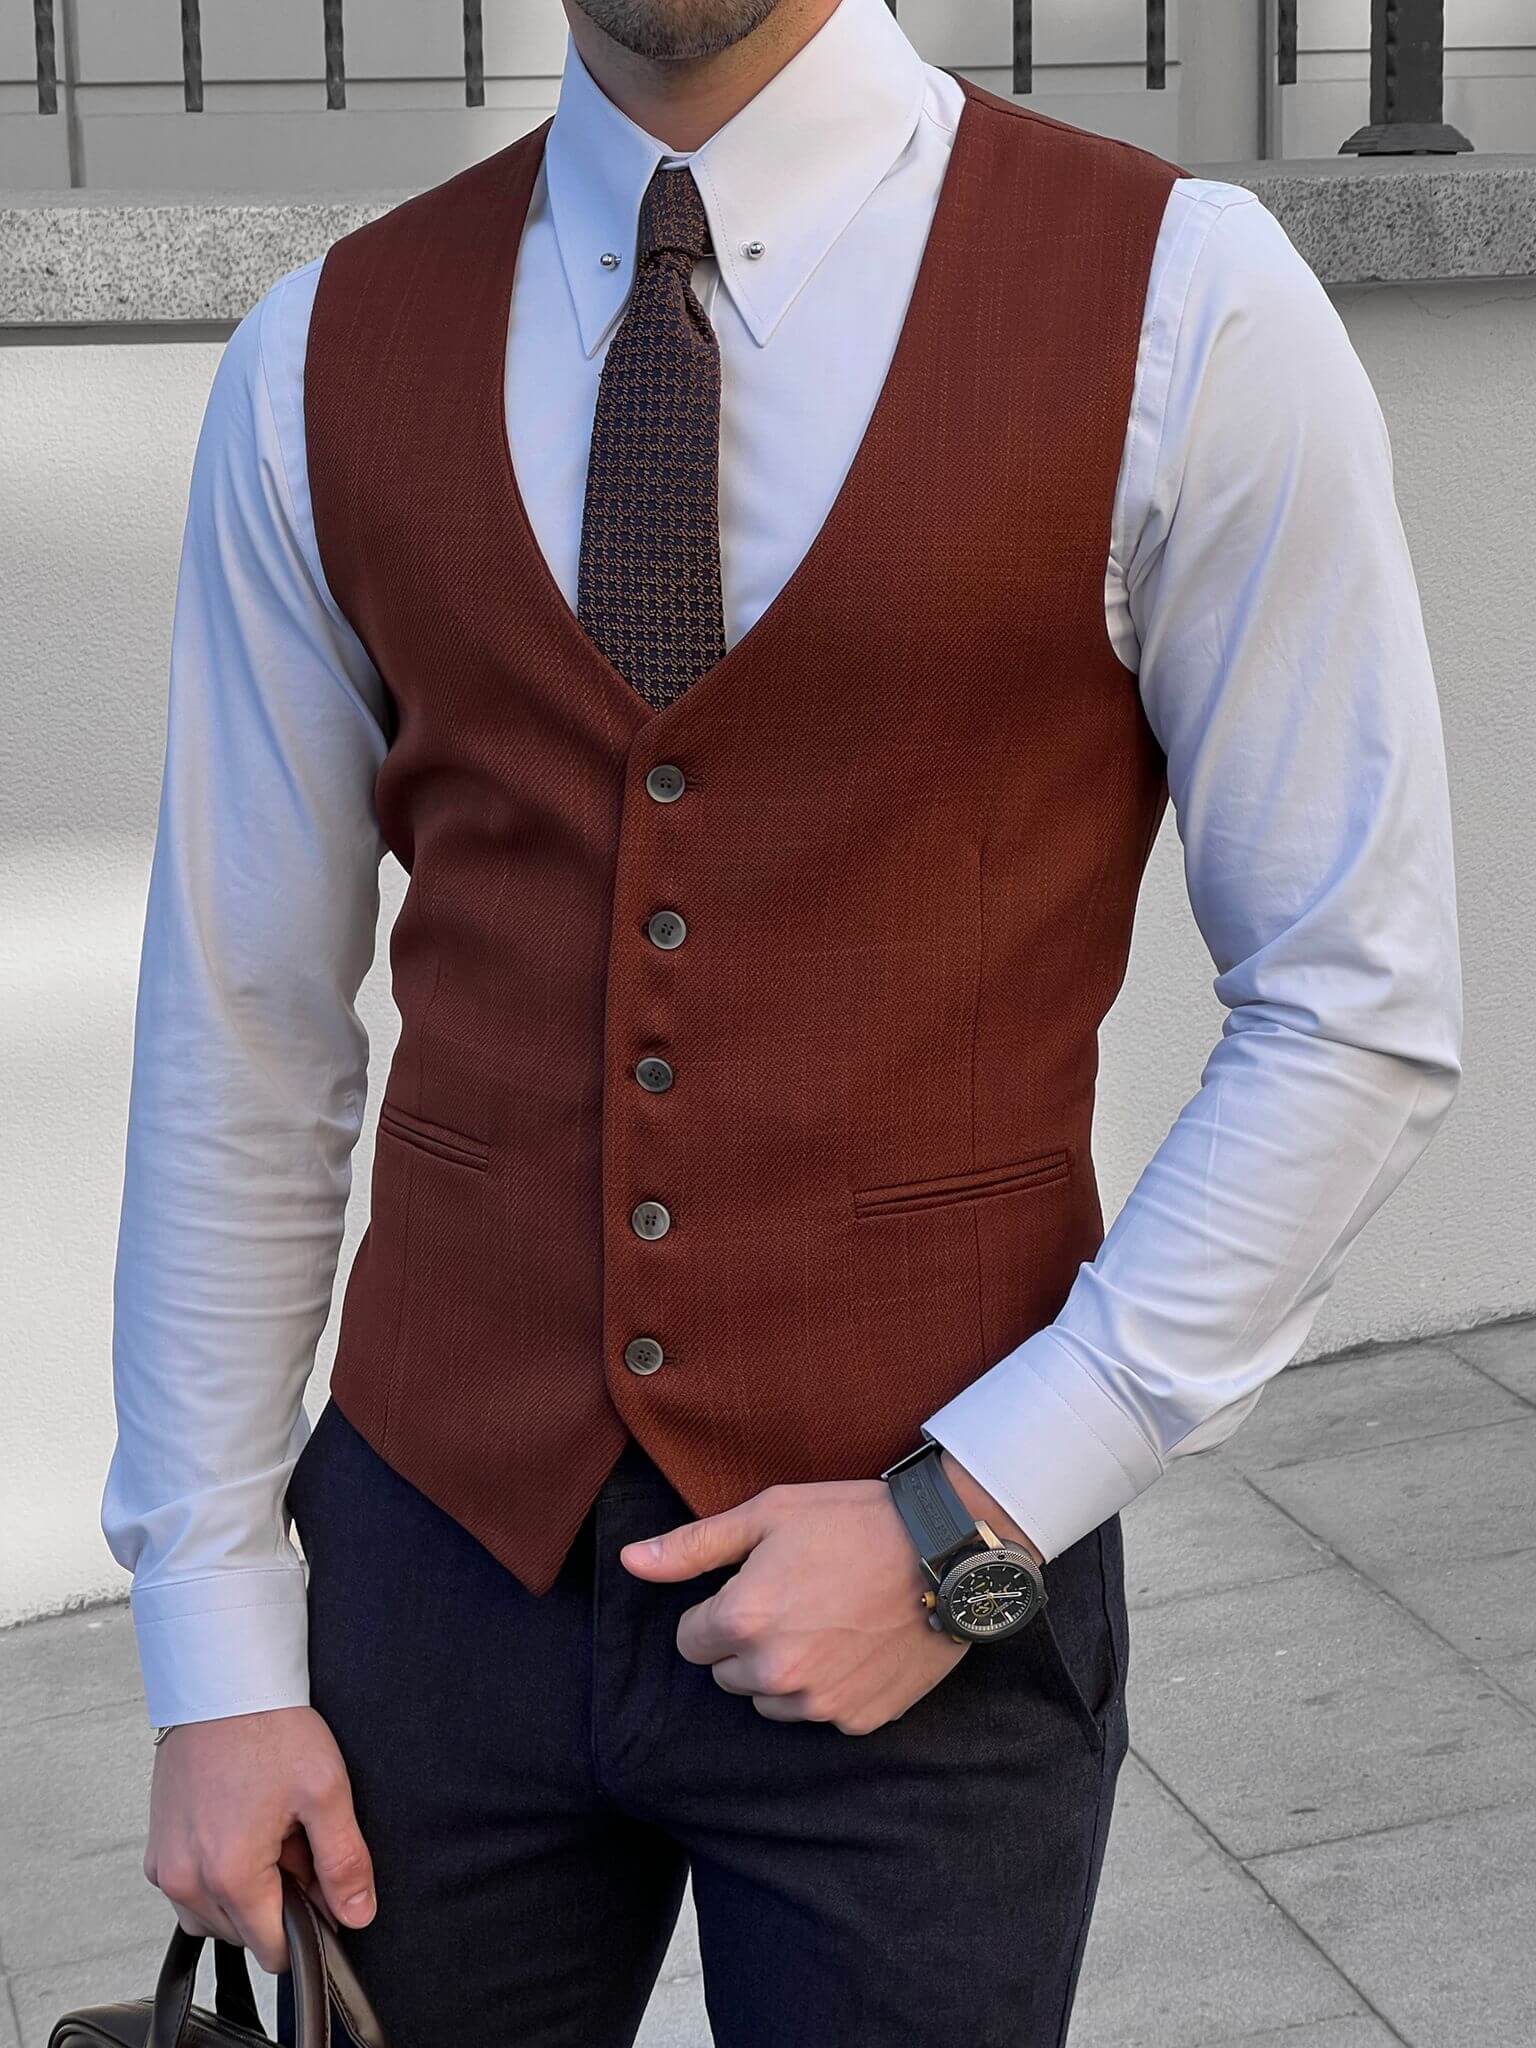 A stylish waistcoat with a slim fit and tile design